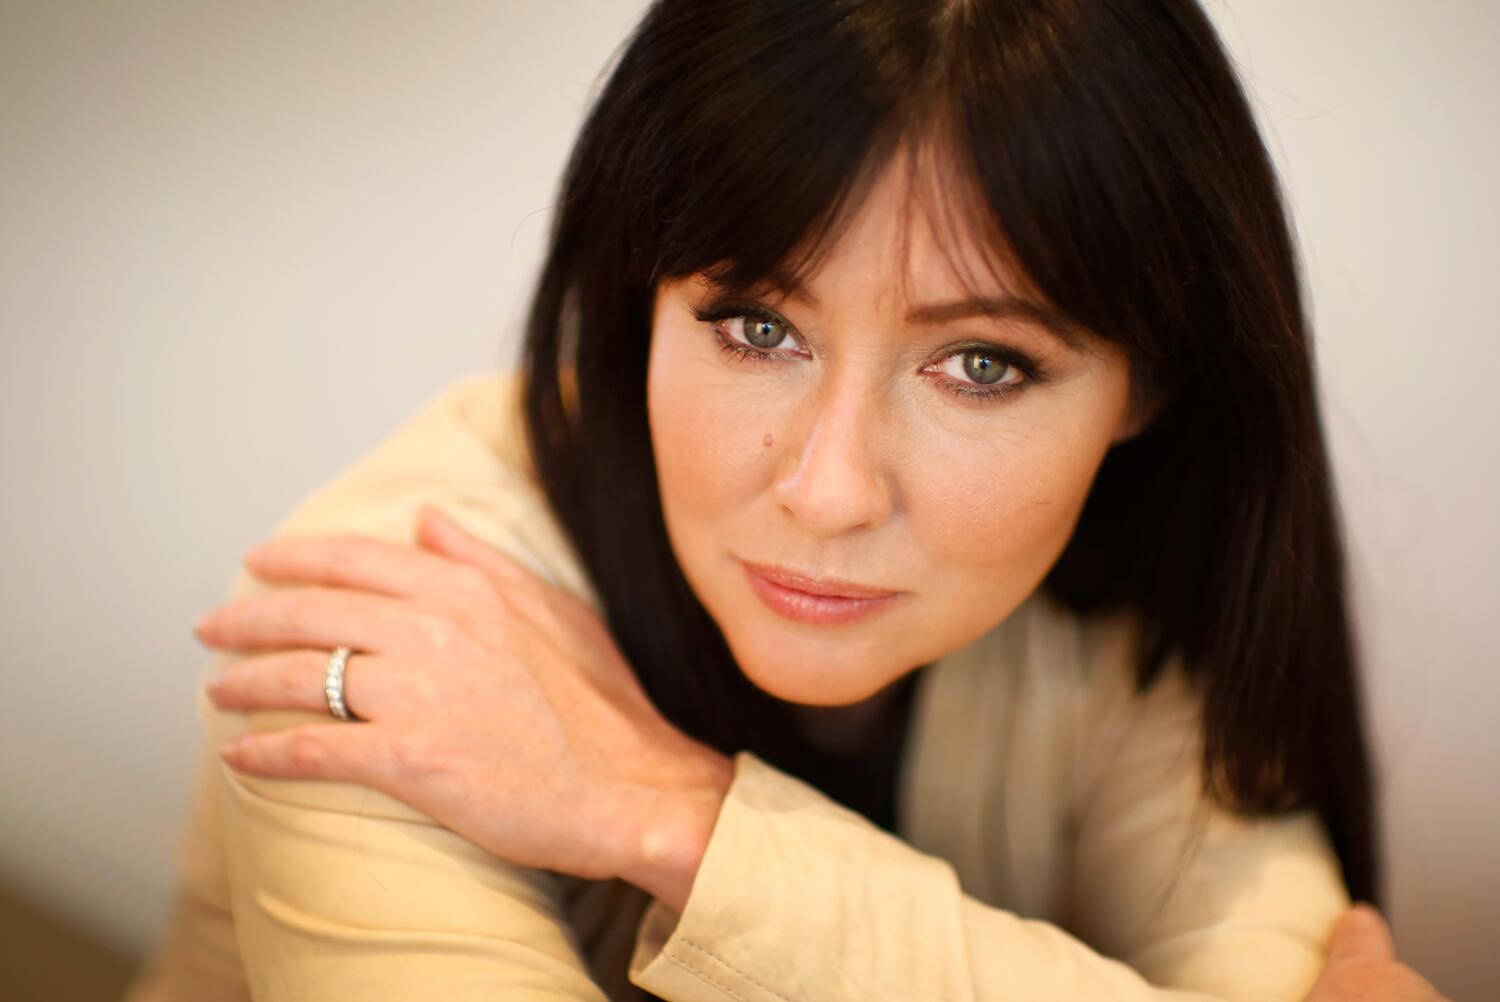 Shannen Doherty, 'Beverly Hills, 90210' bad girl who battled cancer for years, dies at 53